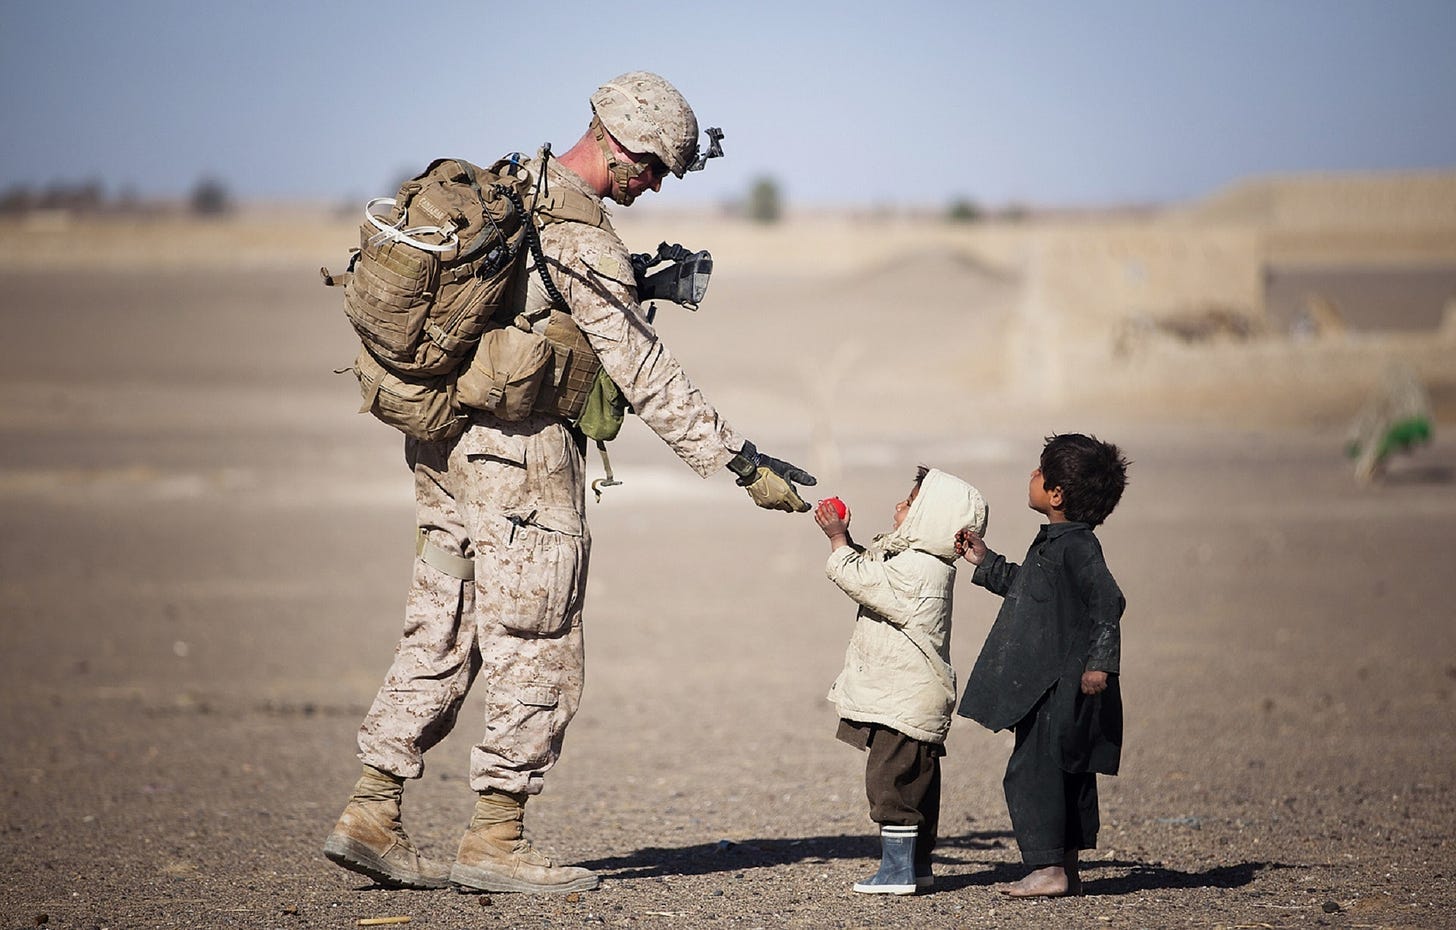 A soldier giving a red fruit to small children during the daytime.